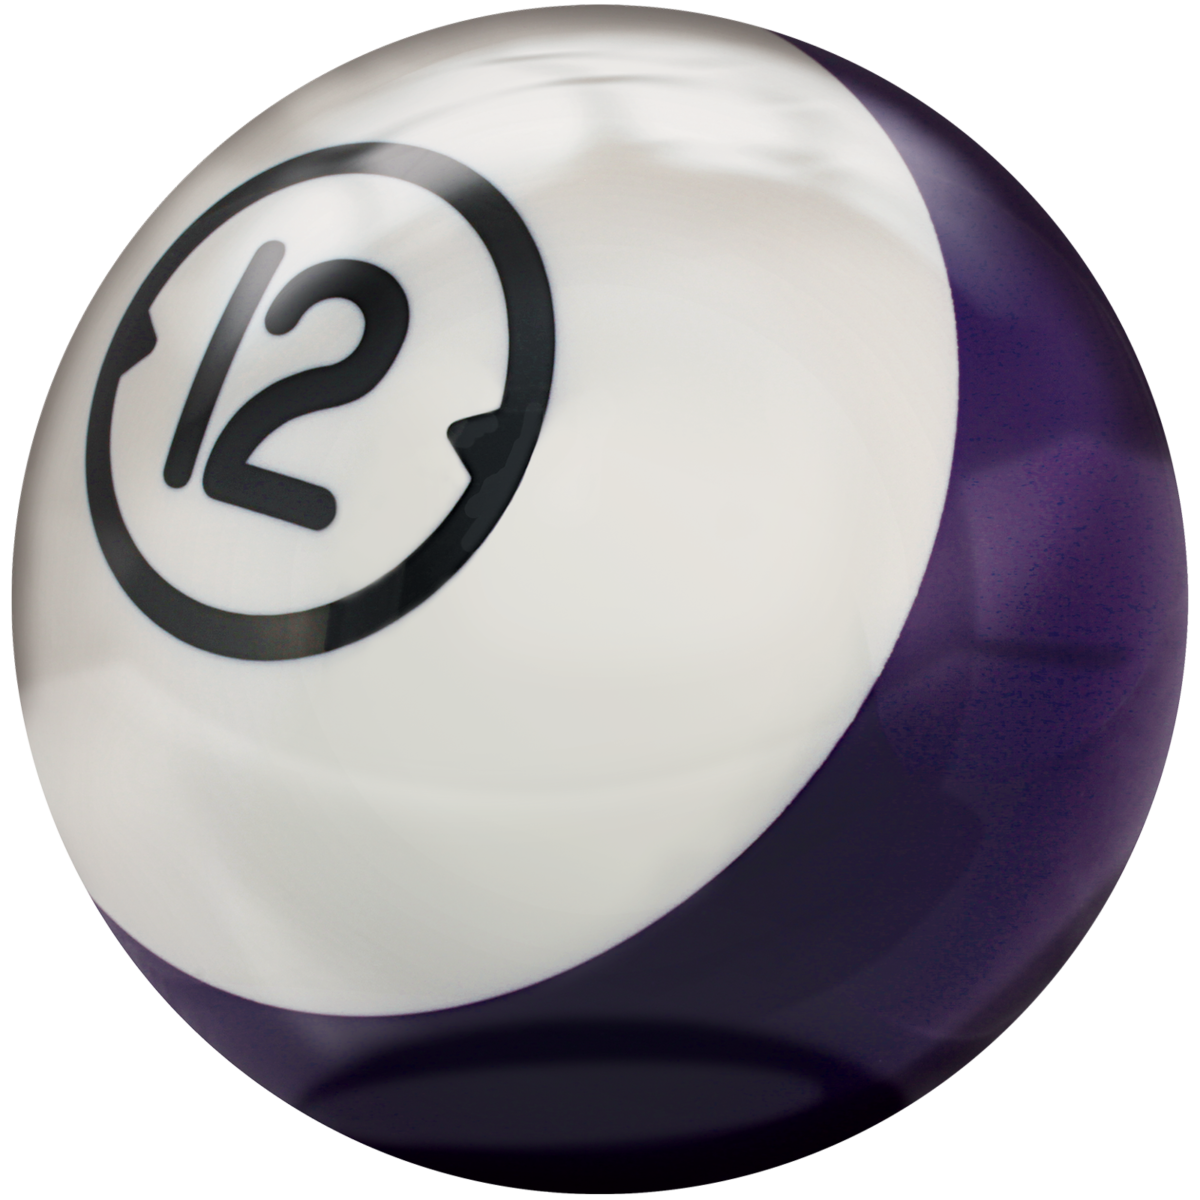 Vintage Billiards Pool Ball Number 12 Replacement Striped Purple 